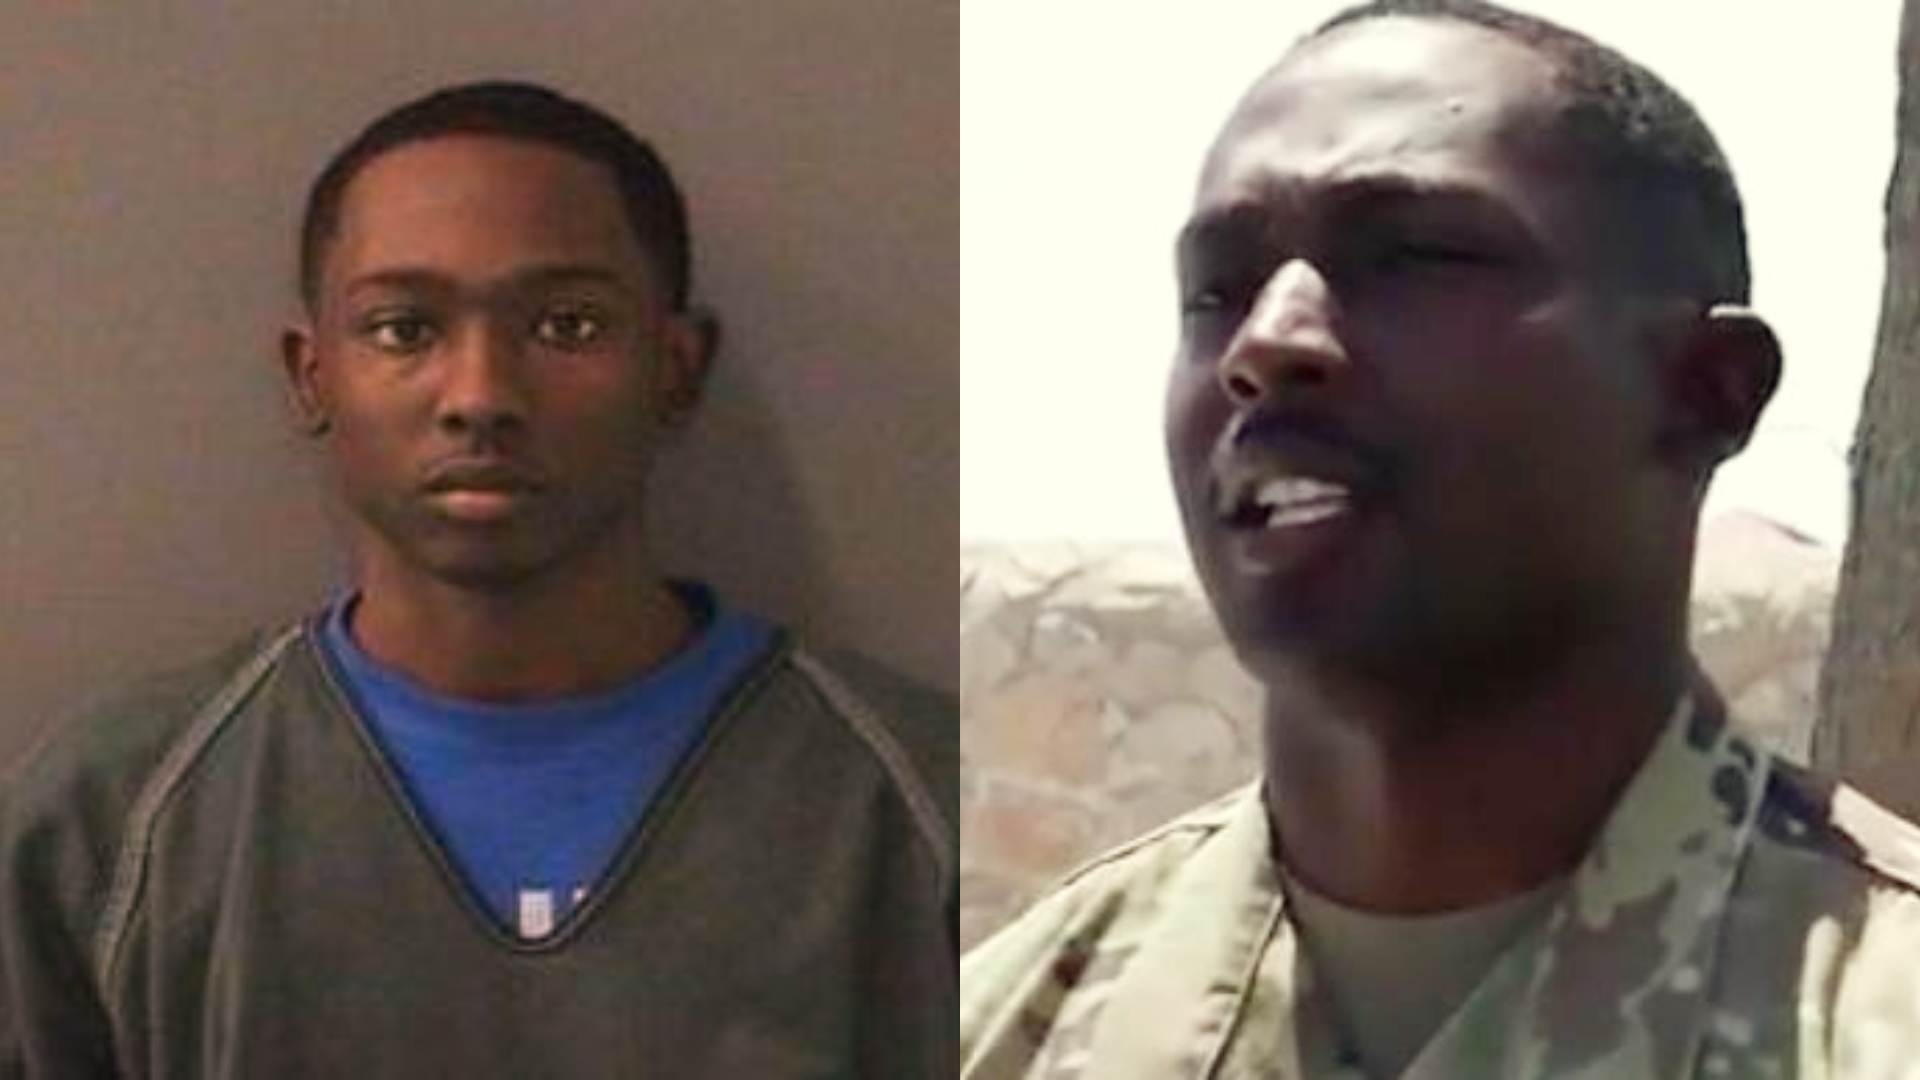 Soldier for saving during Walmart rampage on desertion charge